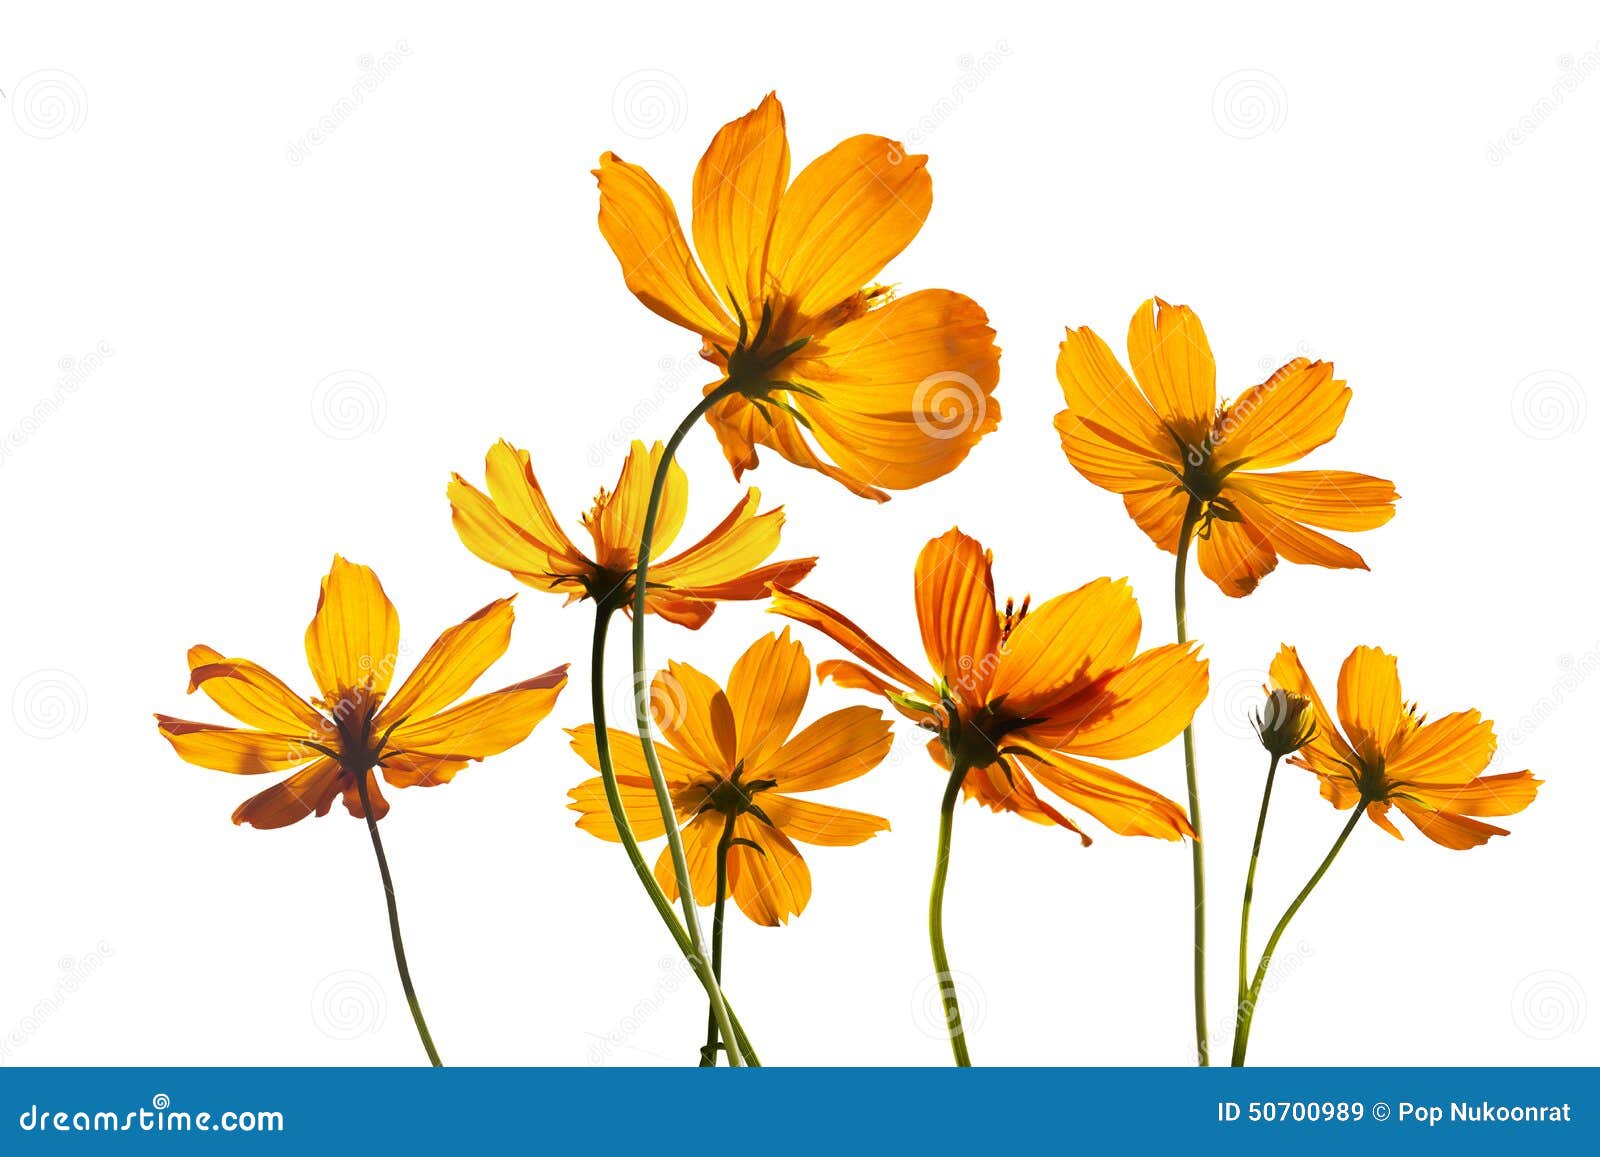 Colorful Flowers Transparent On Isolated White Background, Vibrant ...